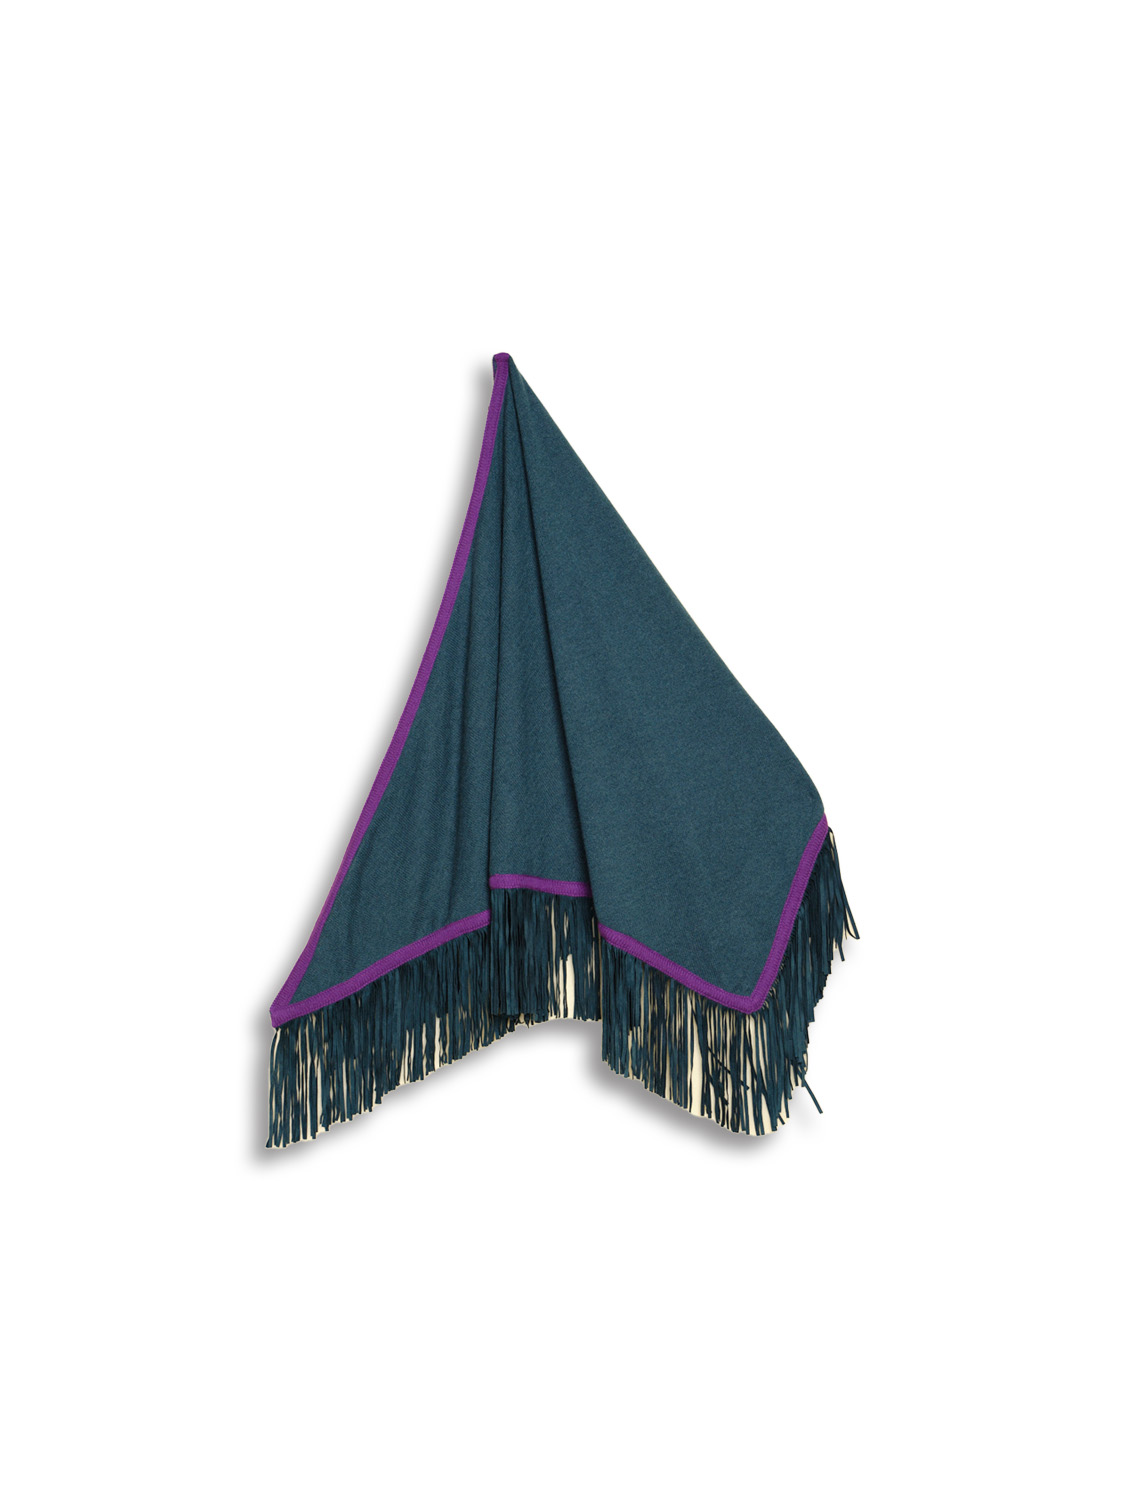 Triangolo - Triangular Cape with Fringes Details 